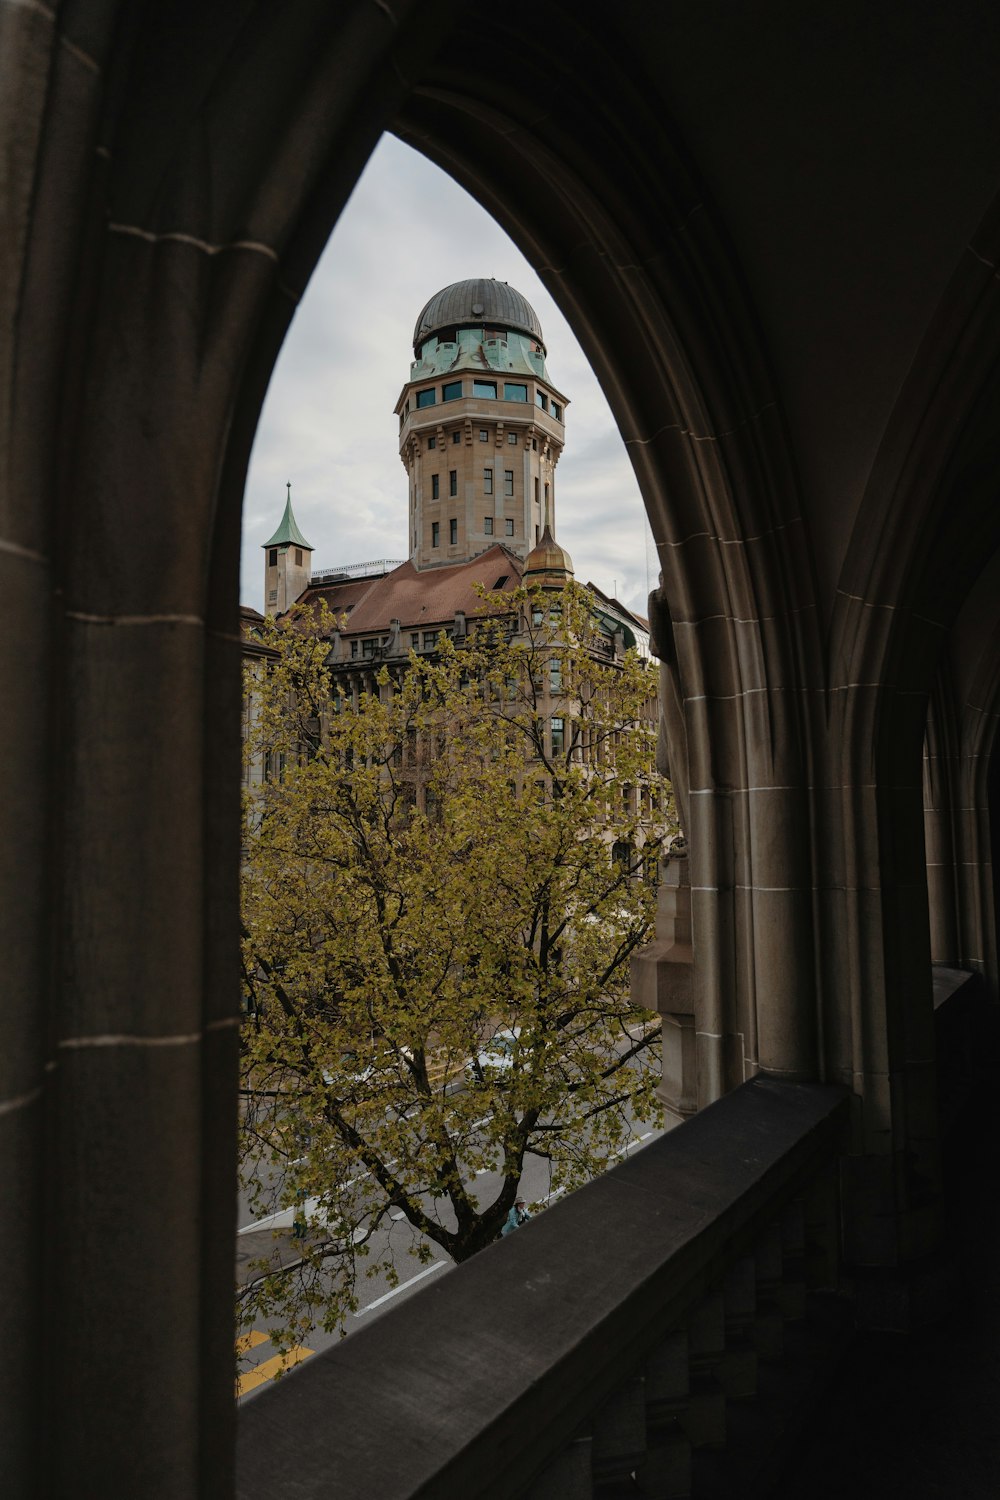 a view of a building through an arched window